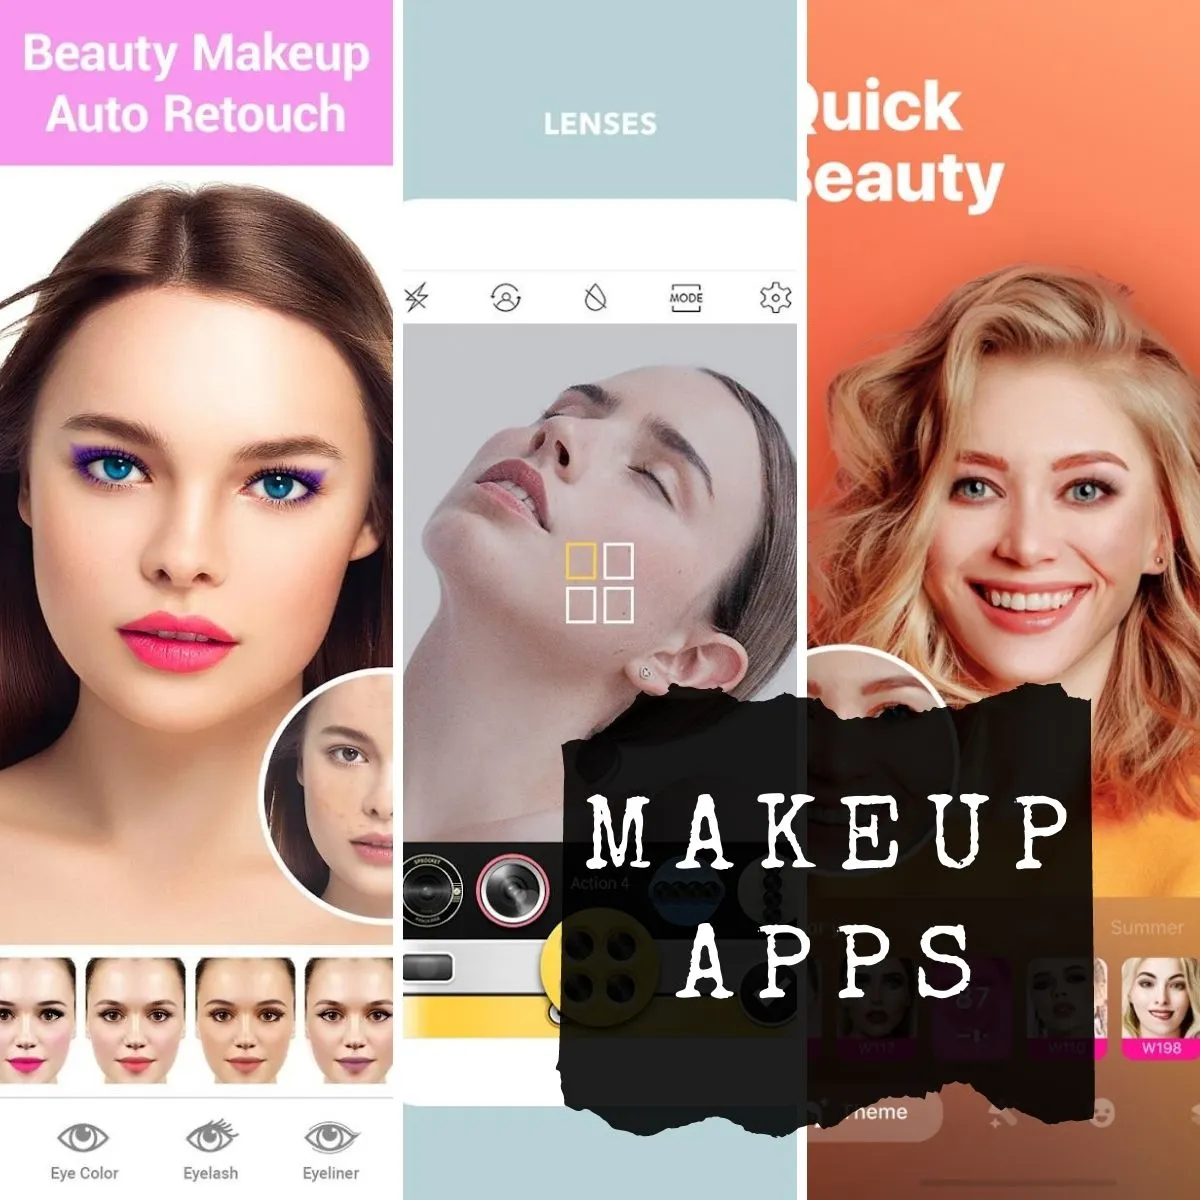 12 Useful Makeup Apps to Help With at Home Makeup in 2022 - BelleTag